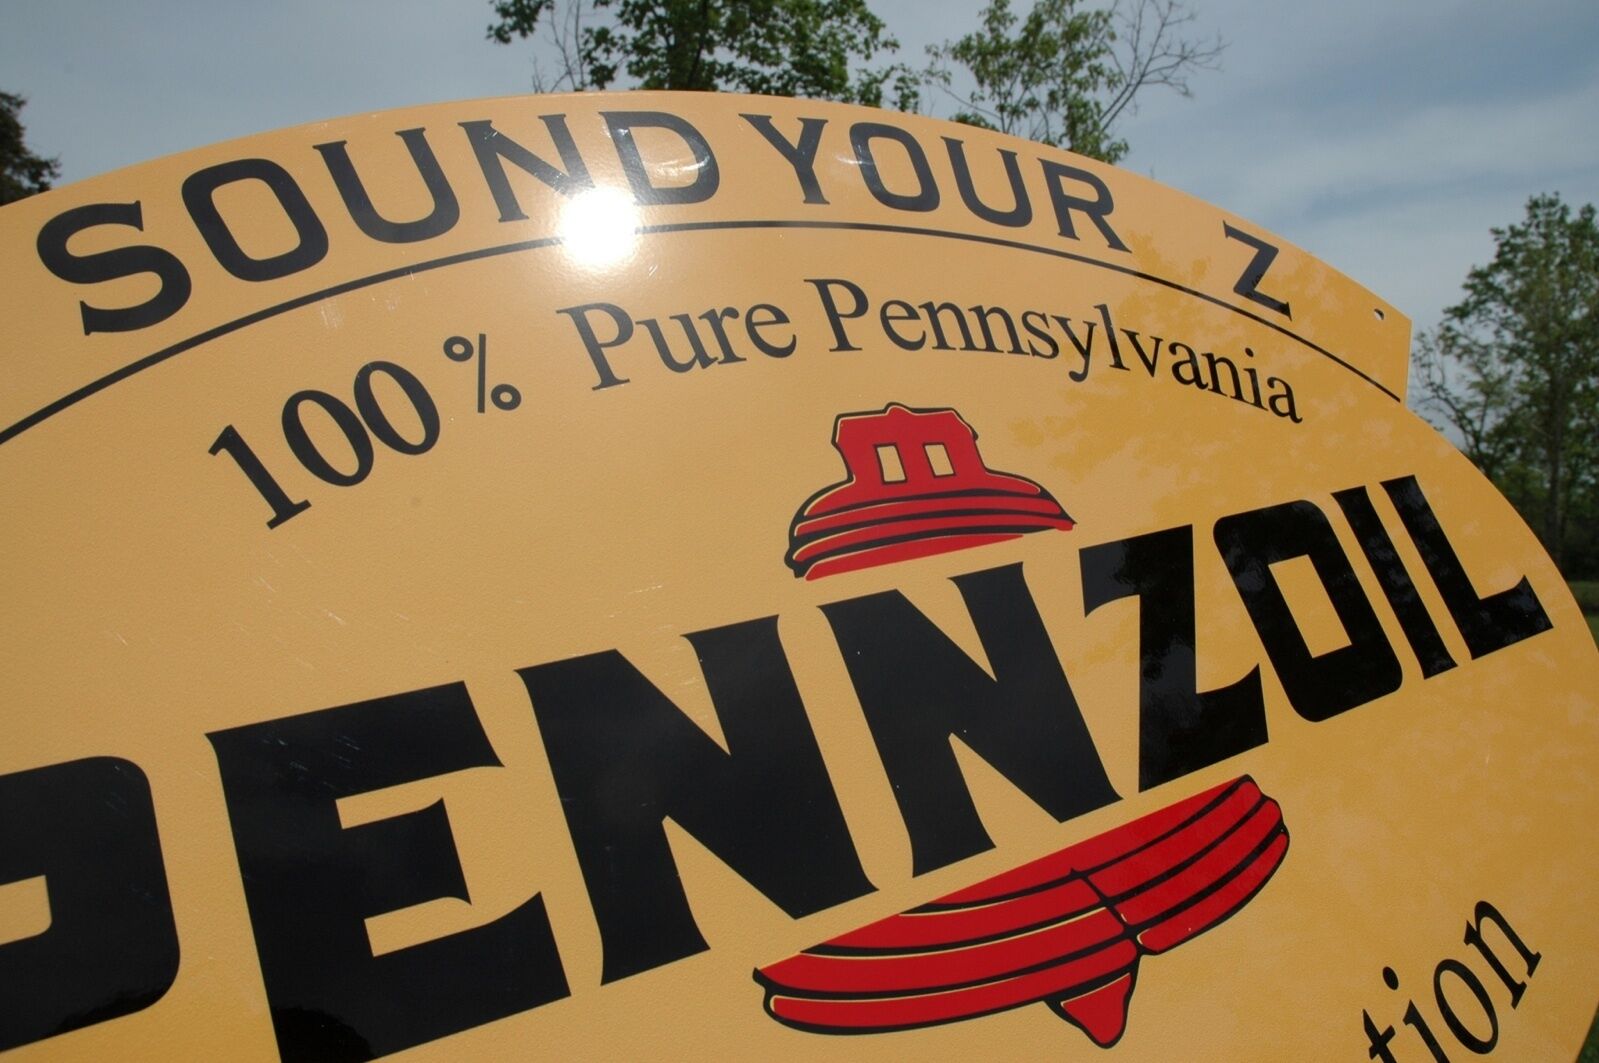 OLD STYLE PENNZOIL "SOUND YOUR Z" MOTOR OIL TWO-SIDED SWINGER SIGN MADE IN USA! Без бренда - фотография #3